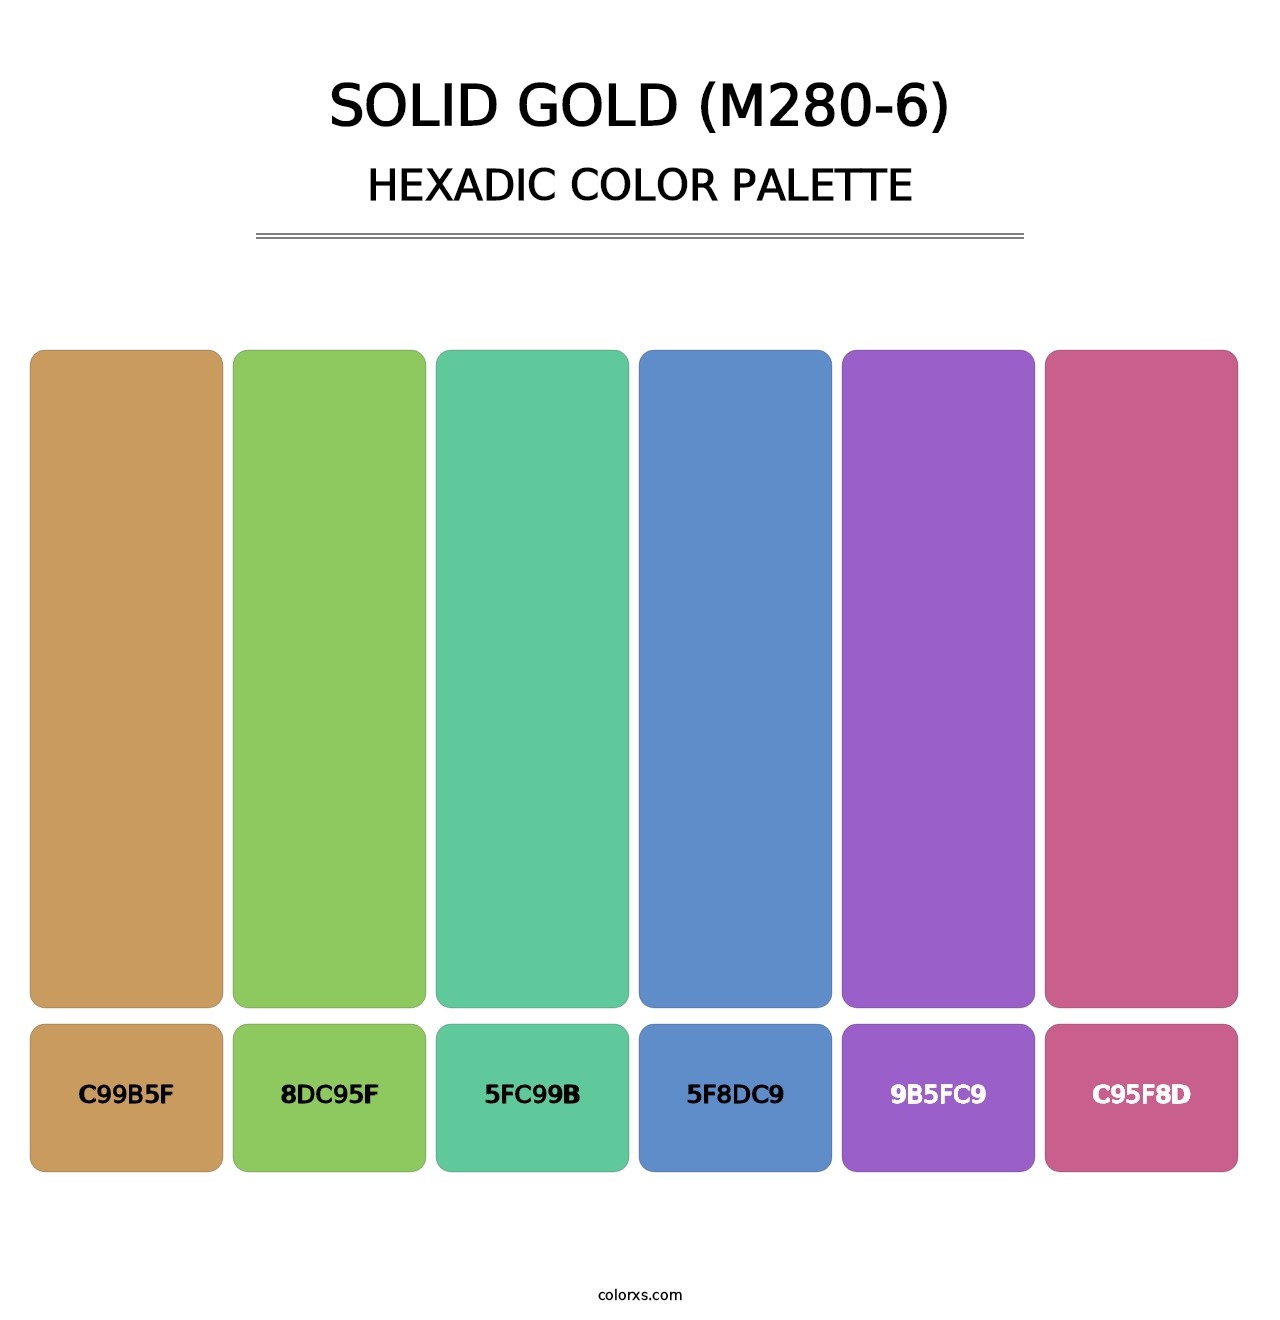 Solid Gold (M280-6) - Hexadic Color Palette